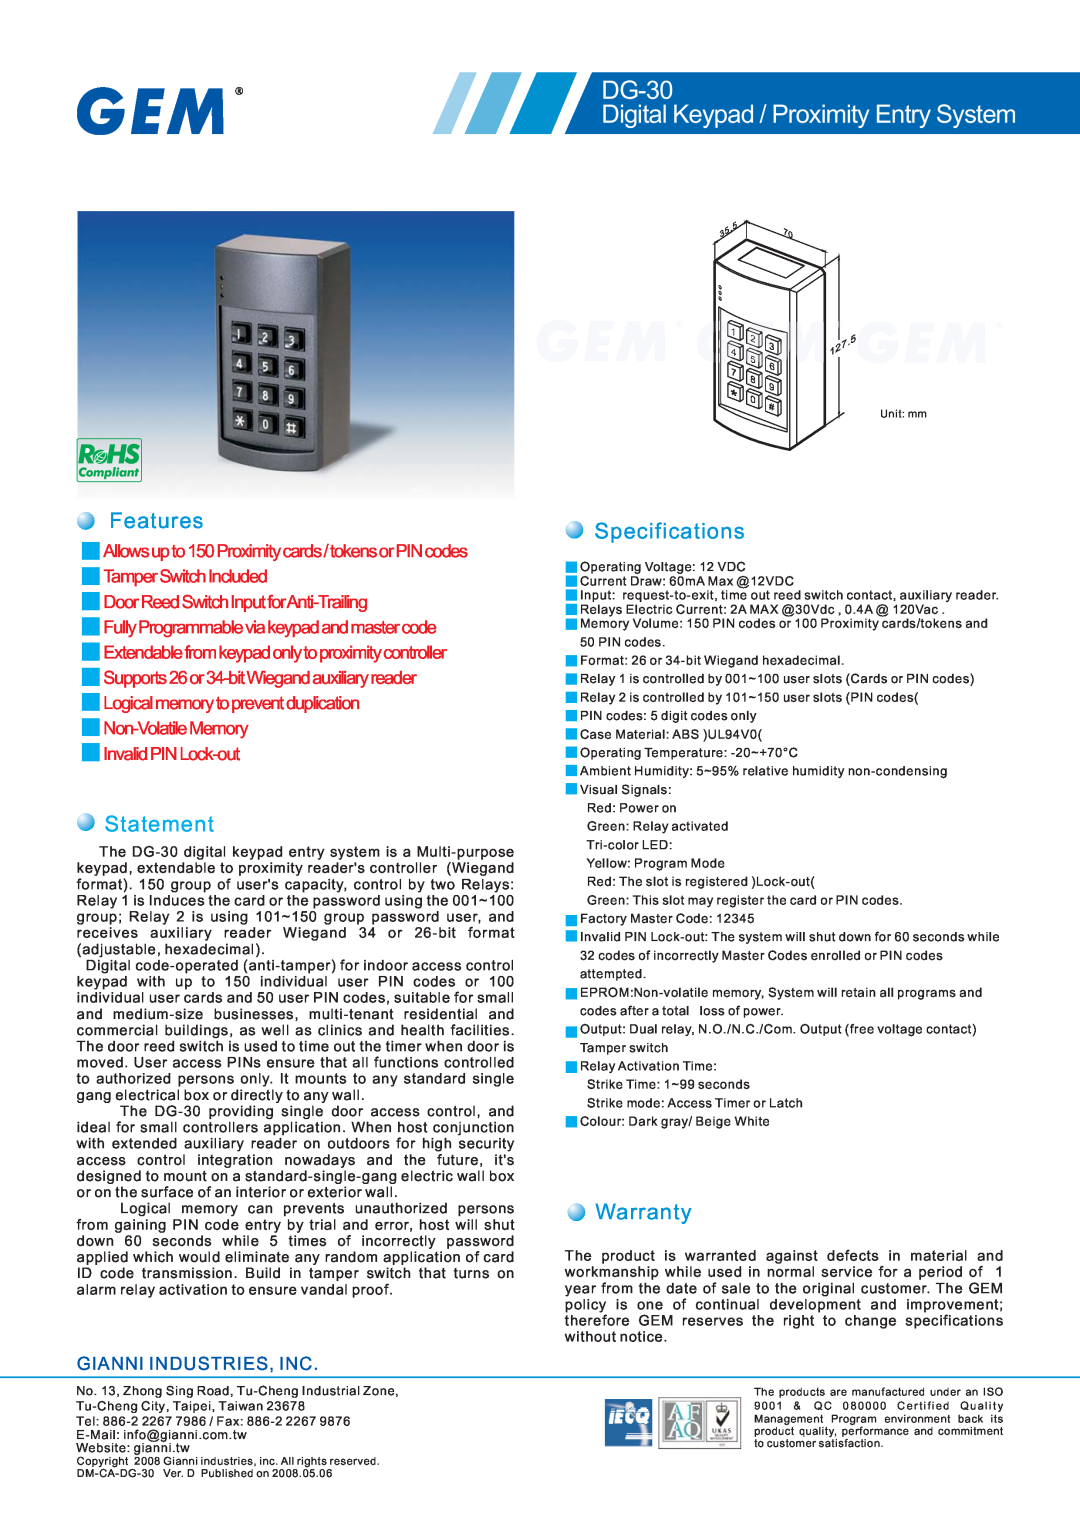 Gianni Industries specifications DG-30 Digital Keypad / Proximity Entry System, Statement, Gianni Industries, Inc 